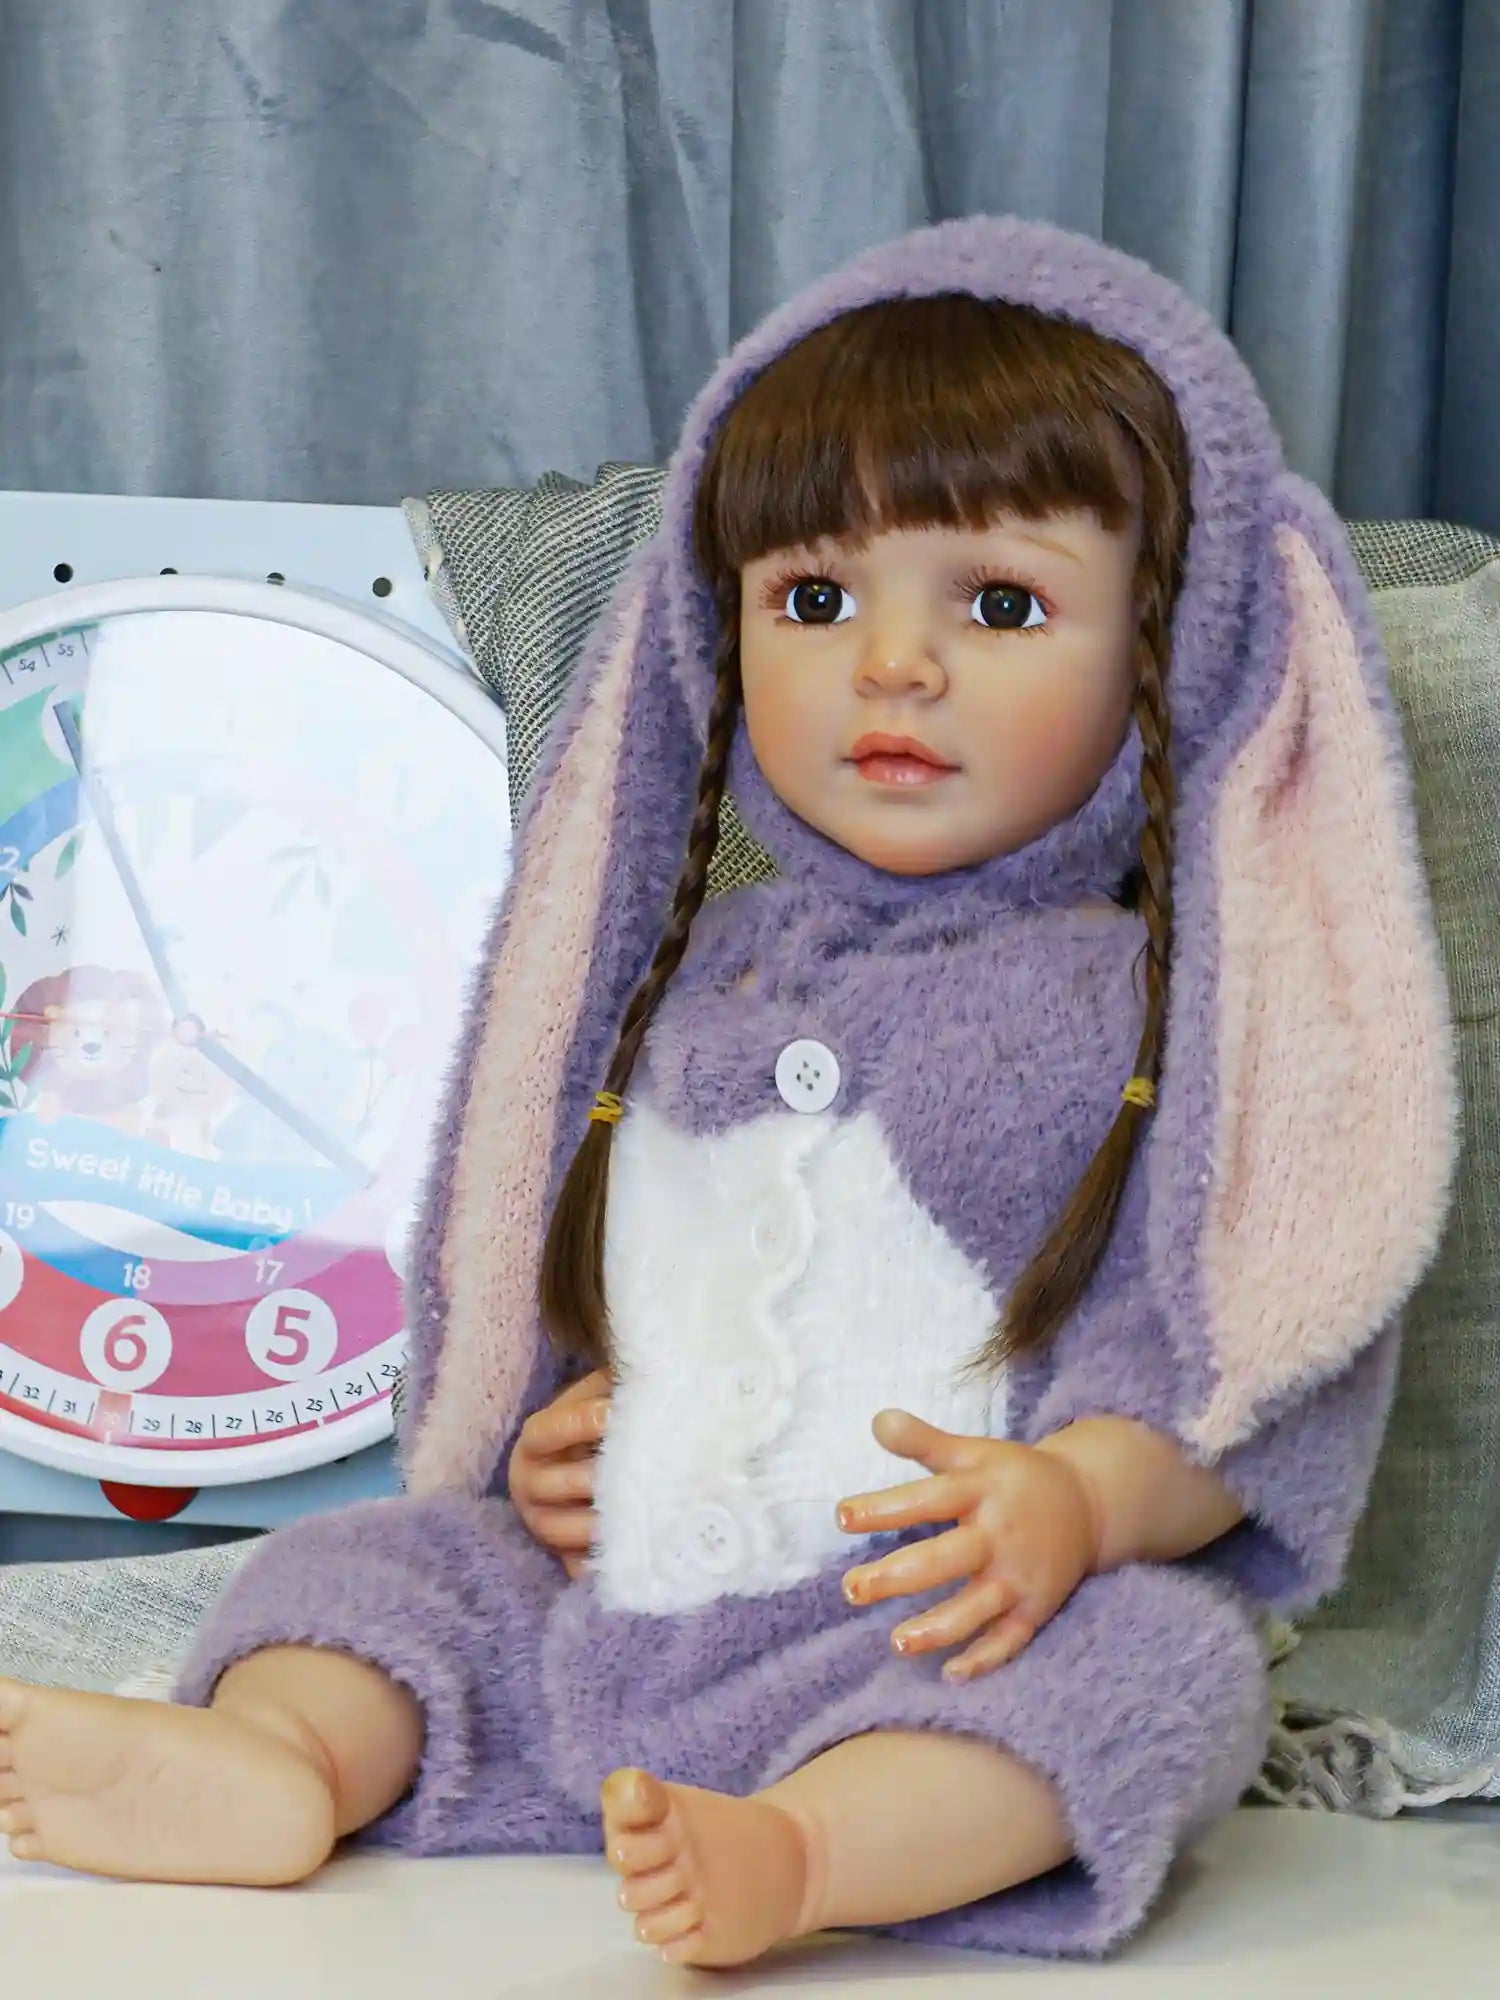 Artisan doll resembling a seated child, with glossy brown hair and curious eyes, outfitted in a whimsical bunny costume with a hood and a white tuft.